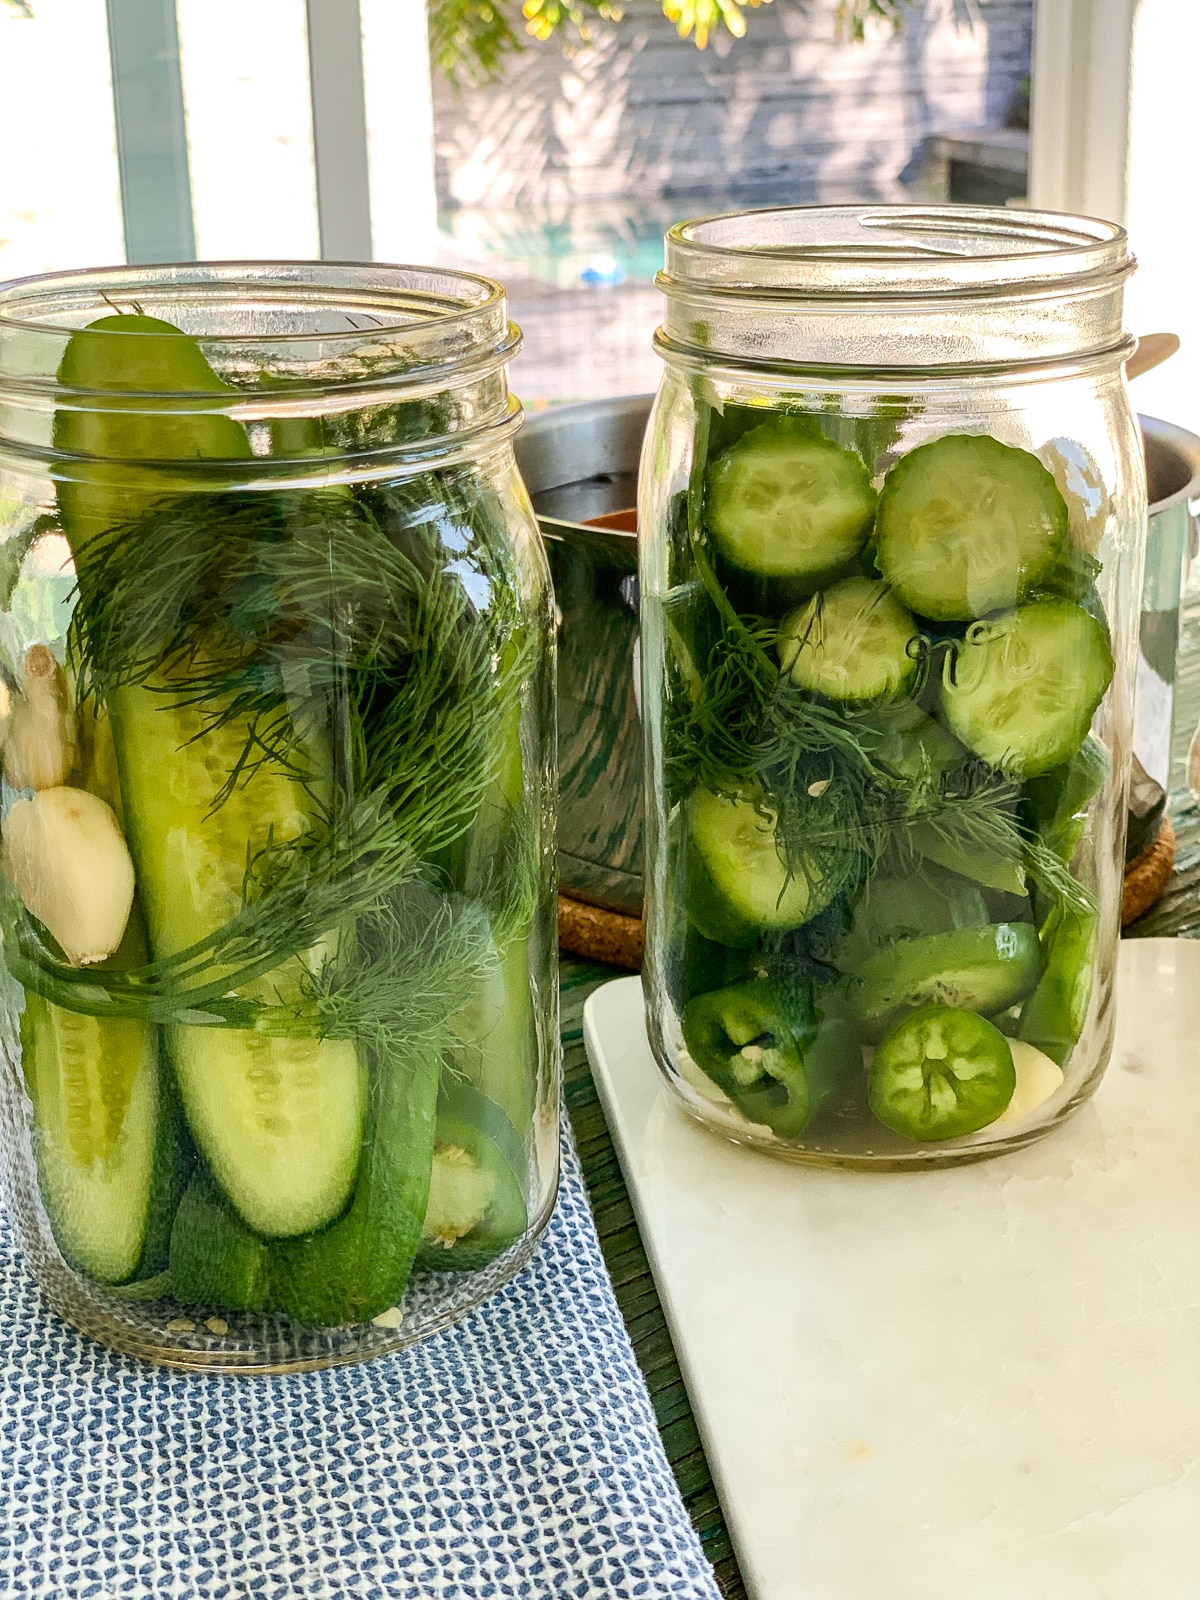 Two glass mason jars filled with dill pickle ingredients ready to add the pickling liquid.